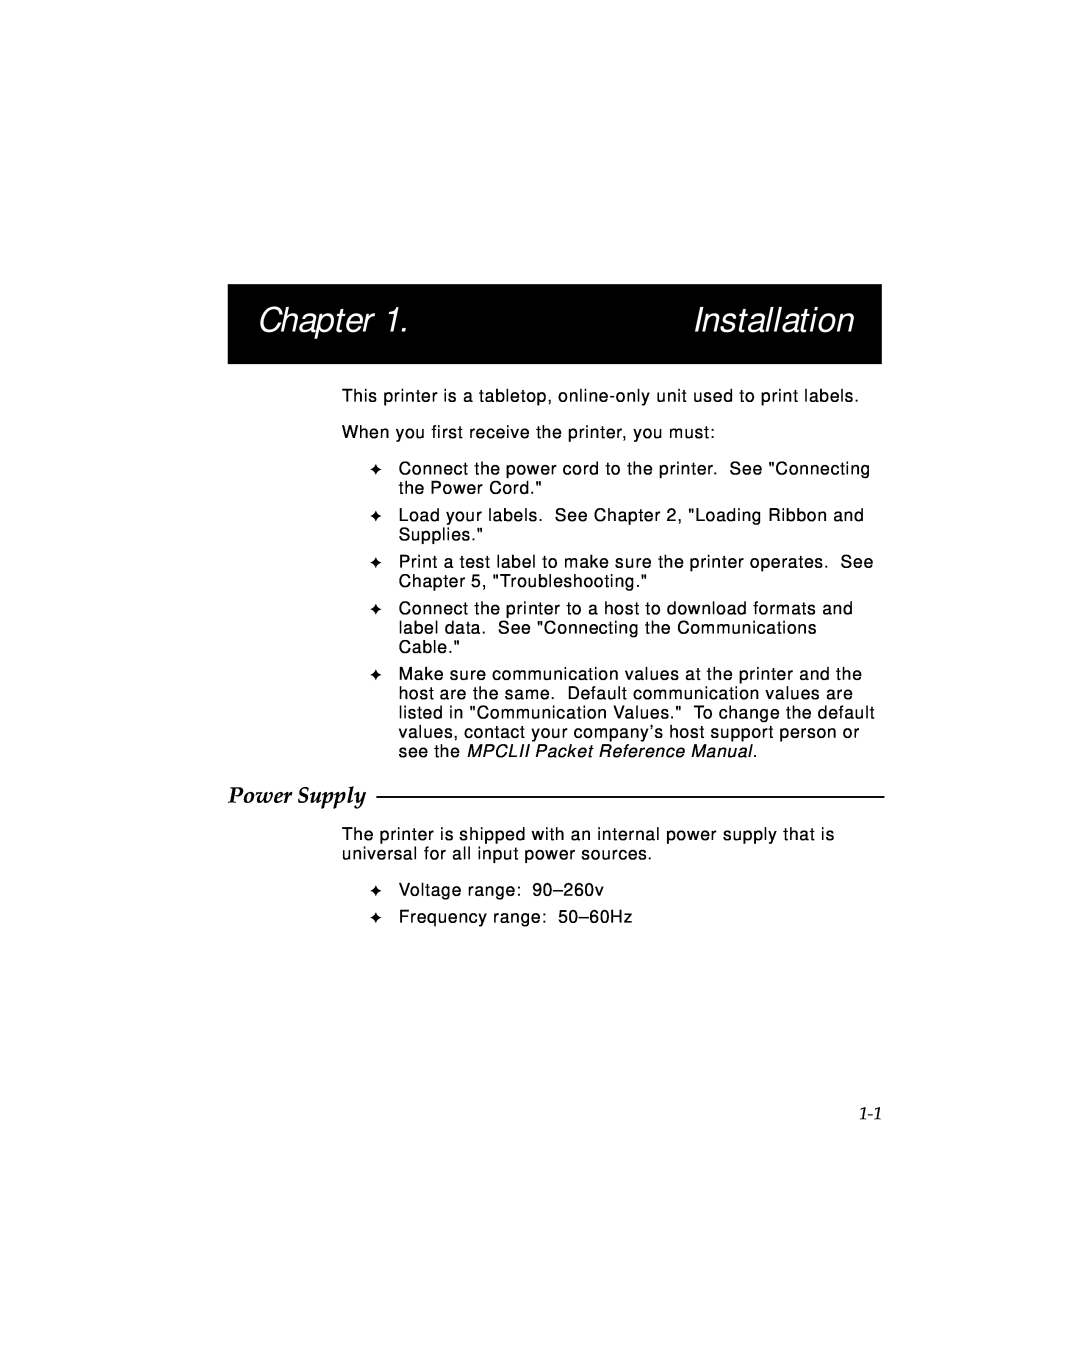 Monarch 9494 manual Chapter, Installation, Power Supply 